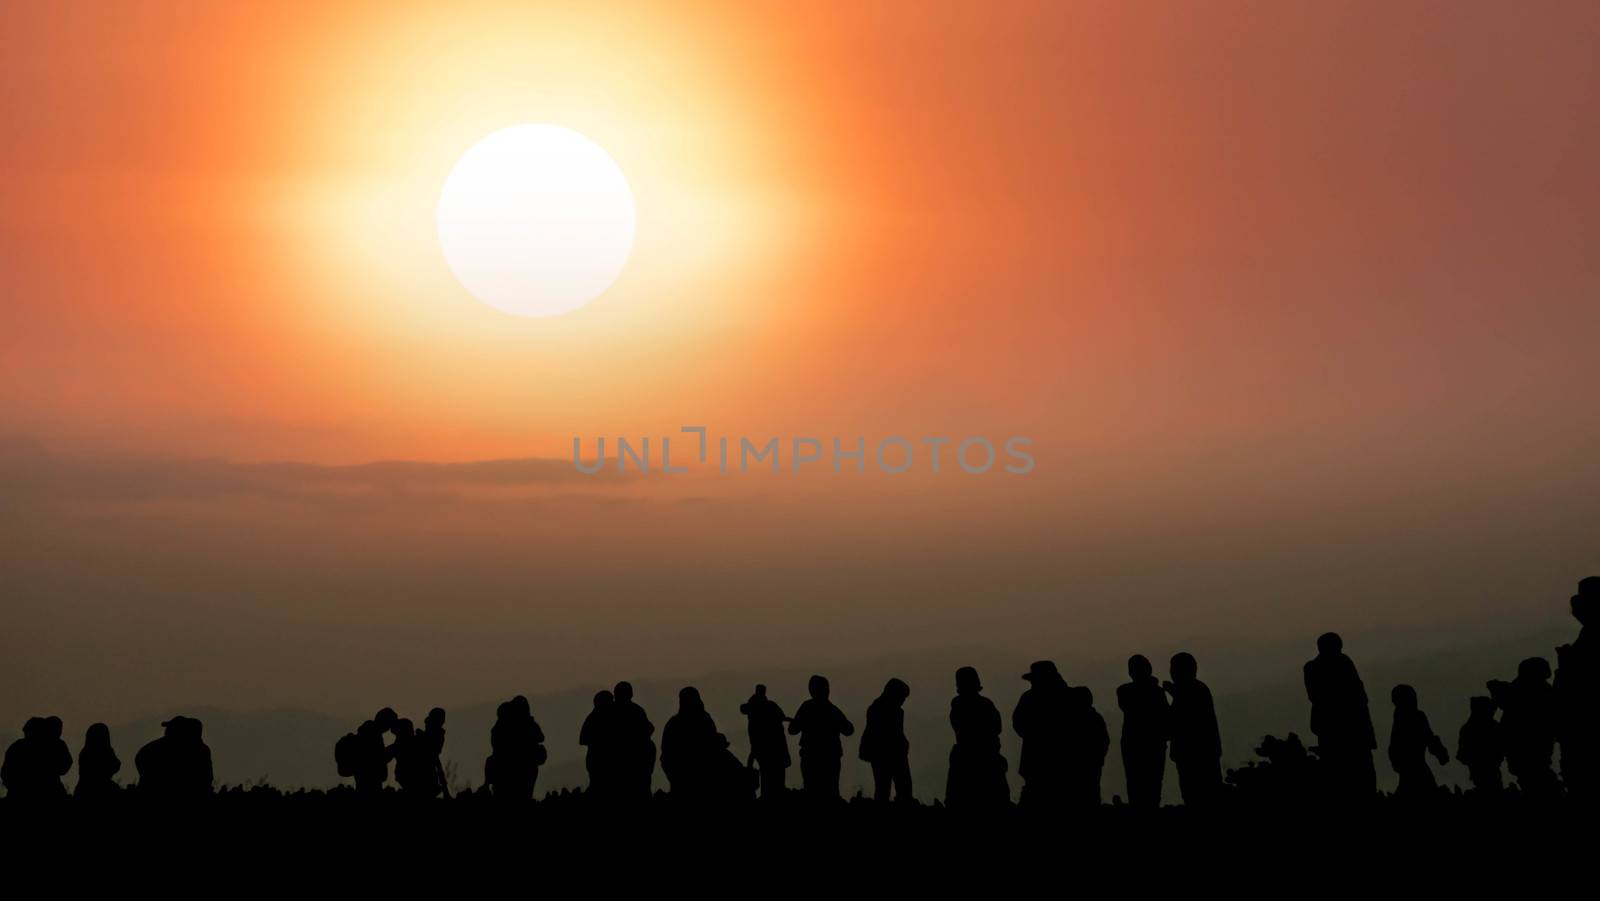 Landscape with silhouette of people on the mountain  with background of cloudy sky and sun